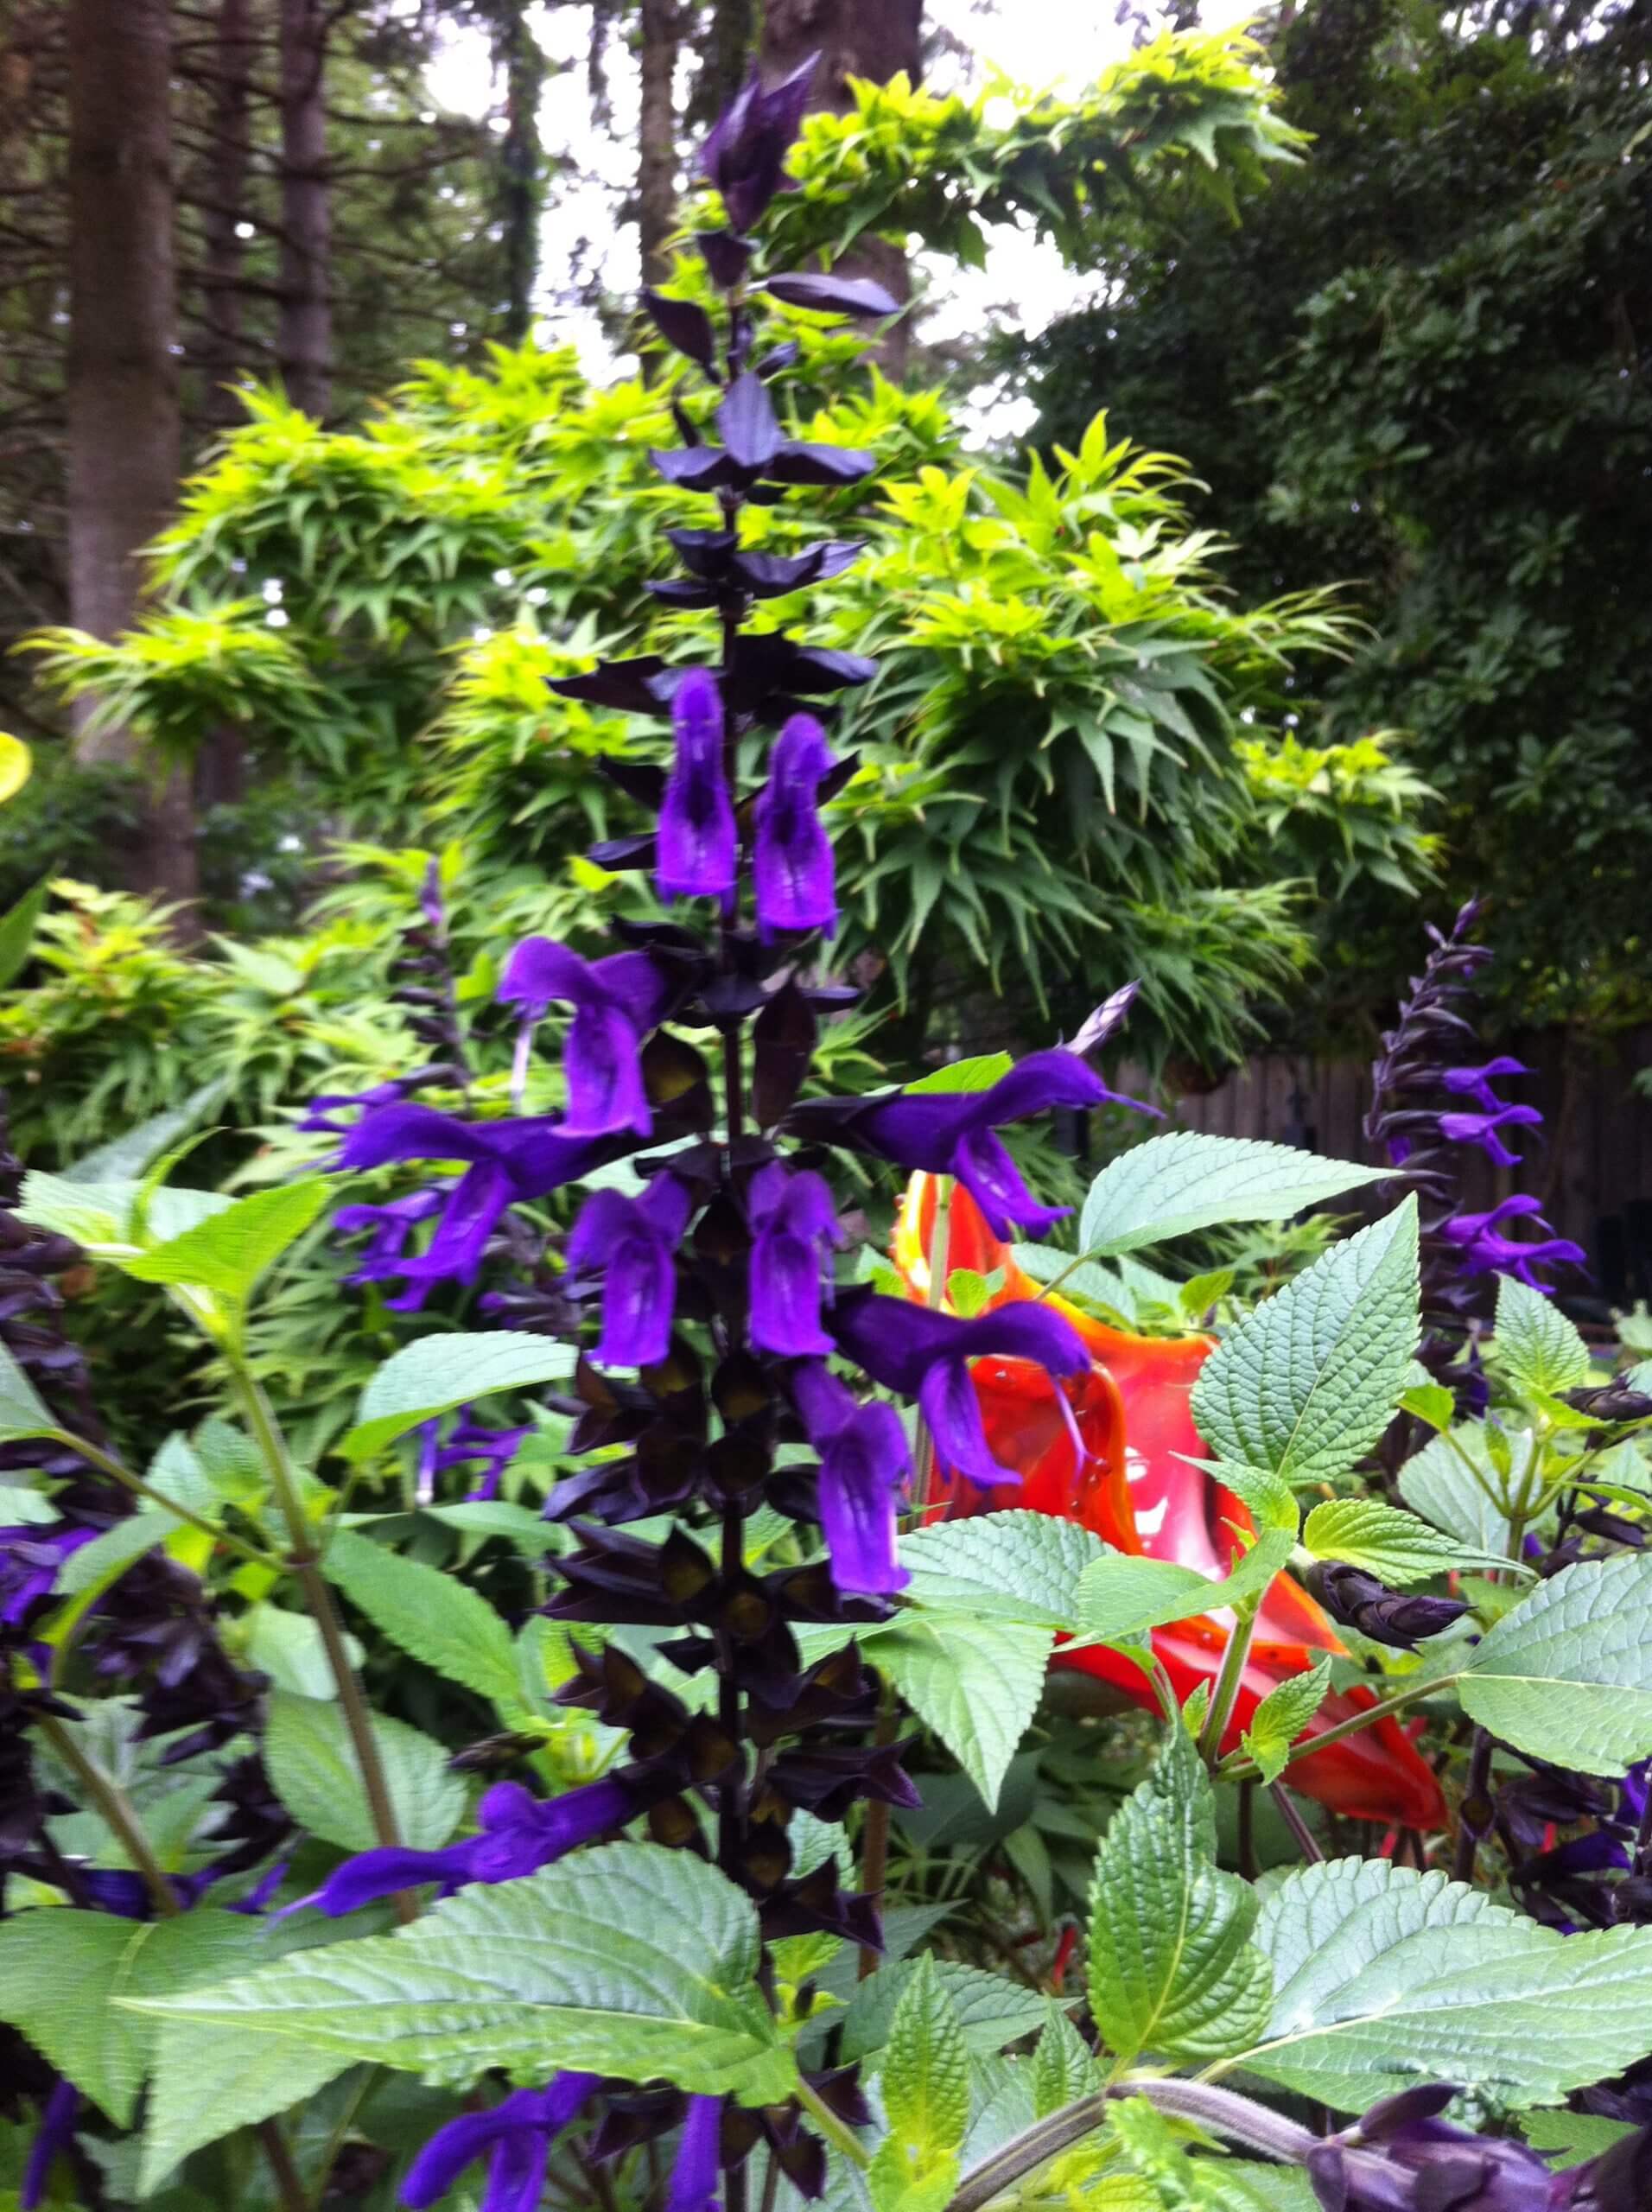 Salvia 'Amistad' is a deep purple beauty that attracts lots of hummingbirds.